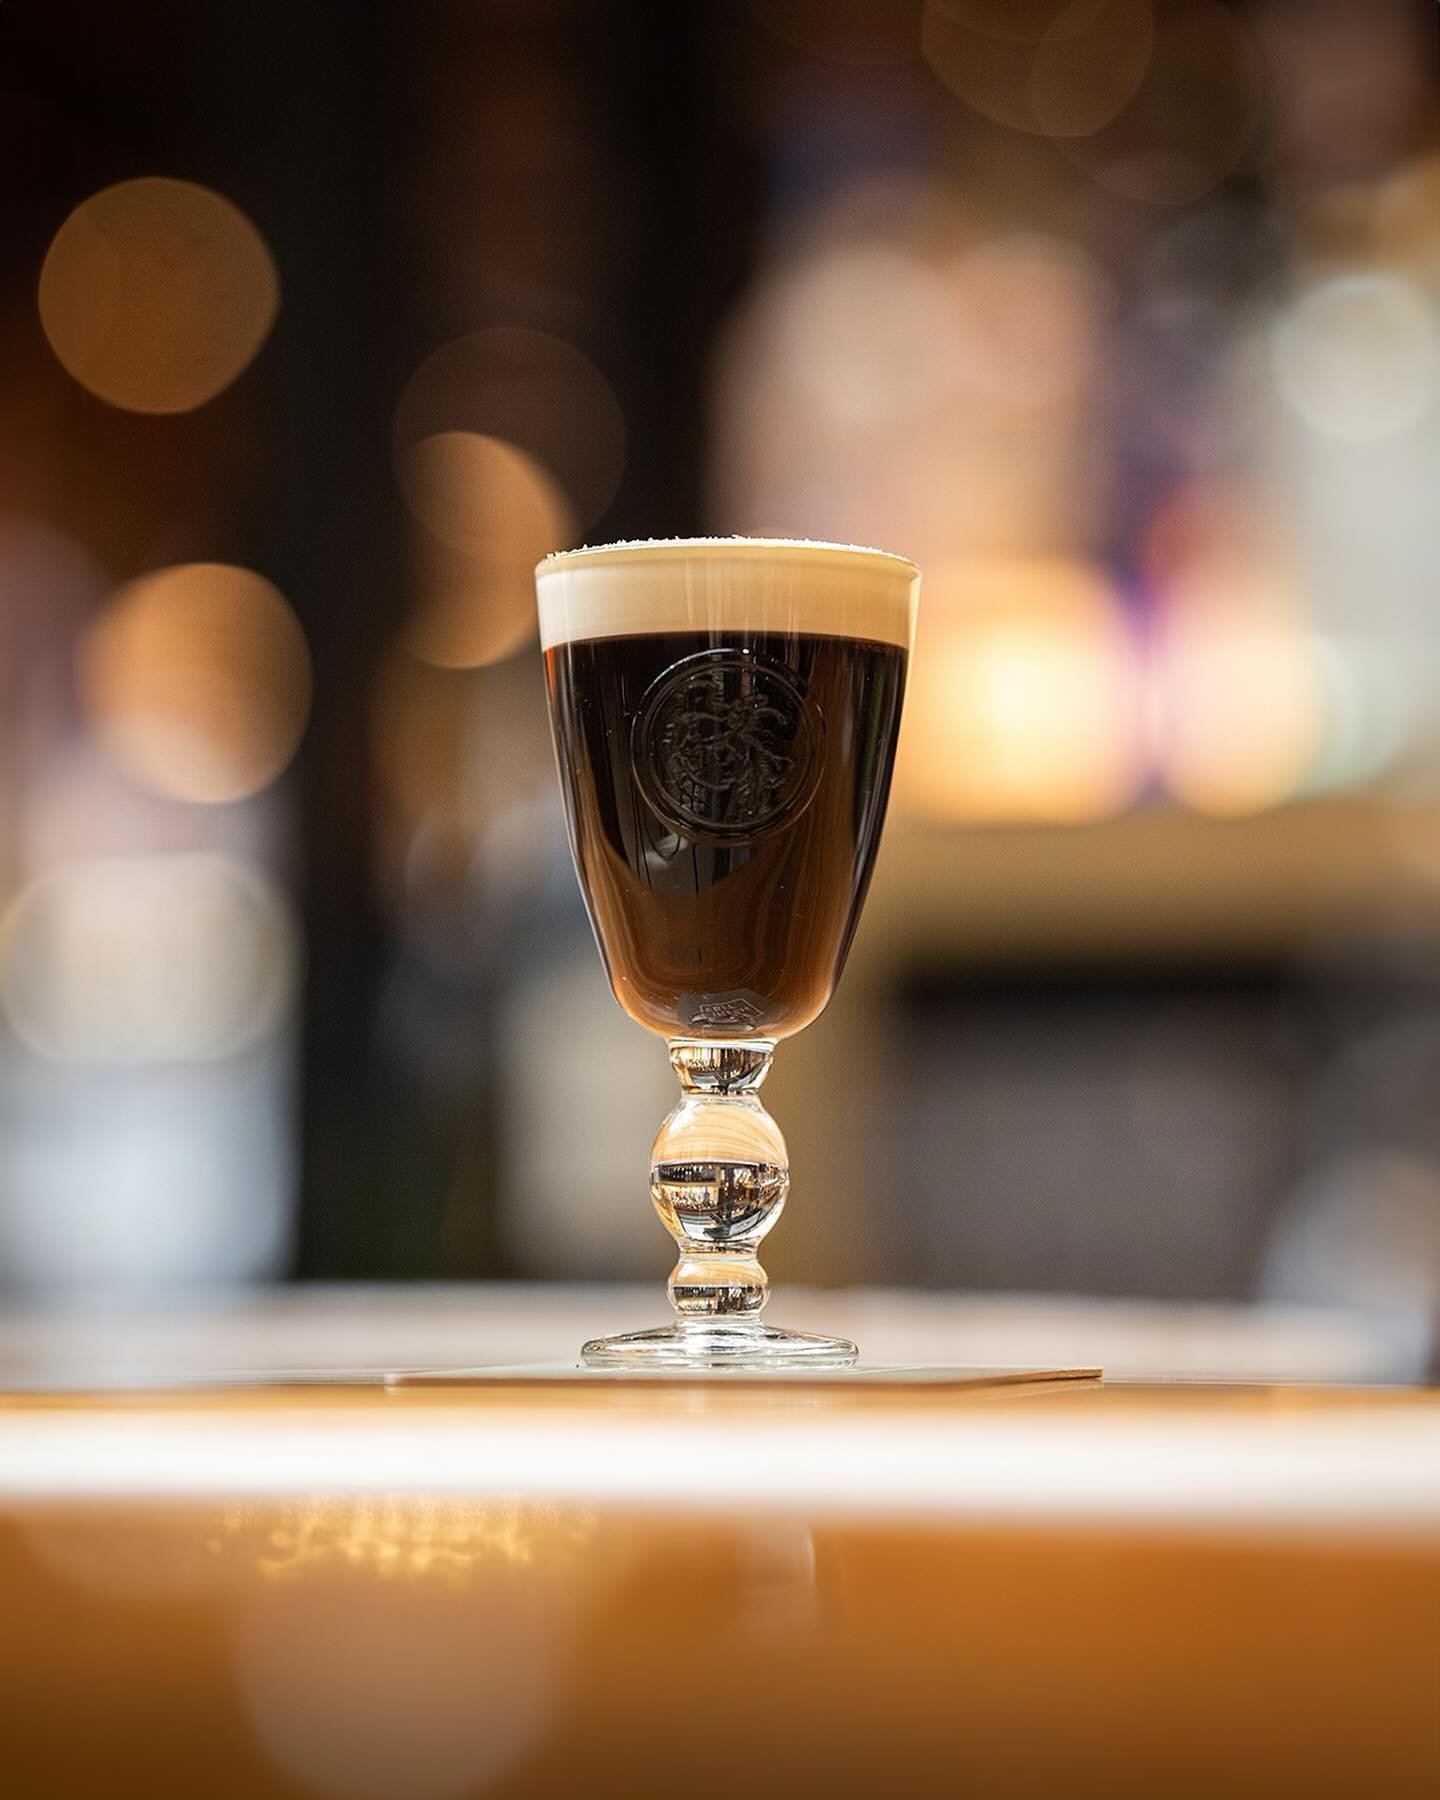 Three things you might not know about our Irish Cawfee. Firstly, the secret spritz - before we top our Coffee with Cream, we spray it with Whiskey from an atomizer to ensure a glossy, smooth finish - no bubbles allowed. Second, throughout April, we&r